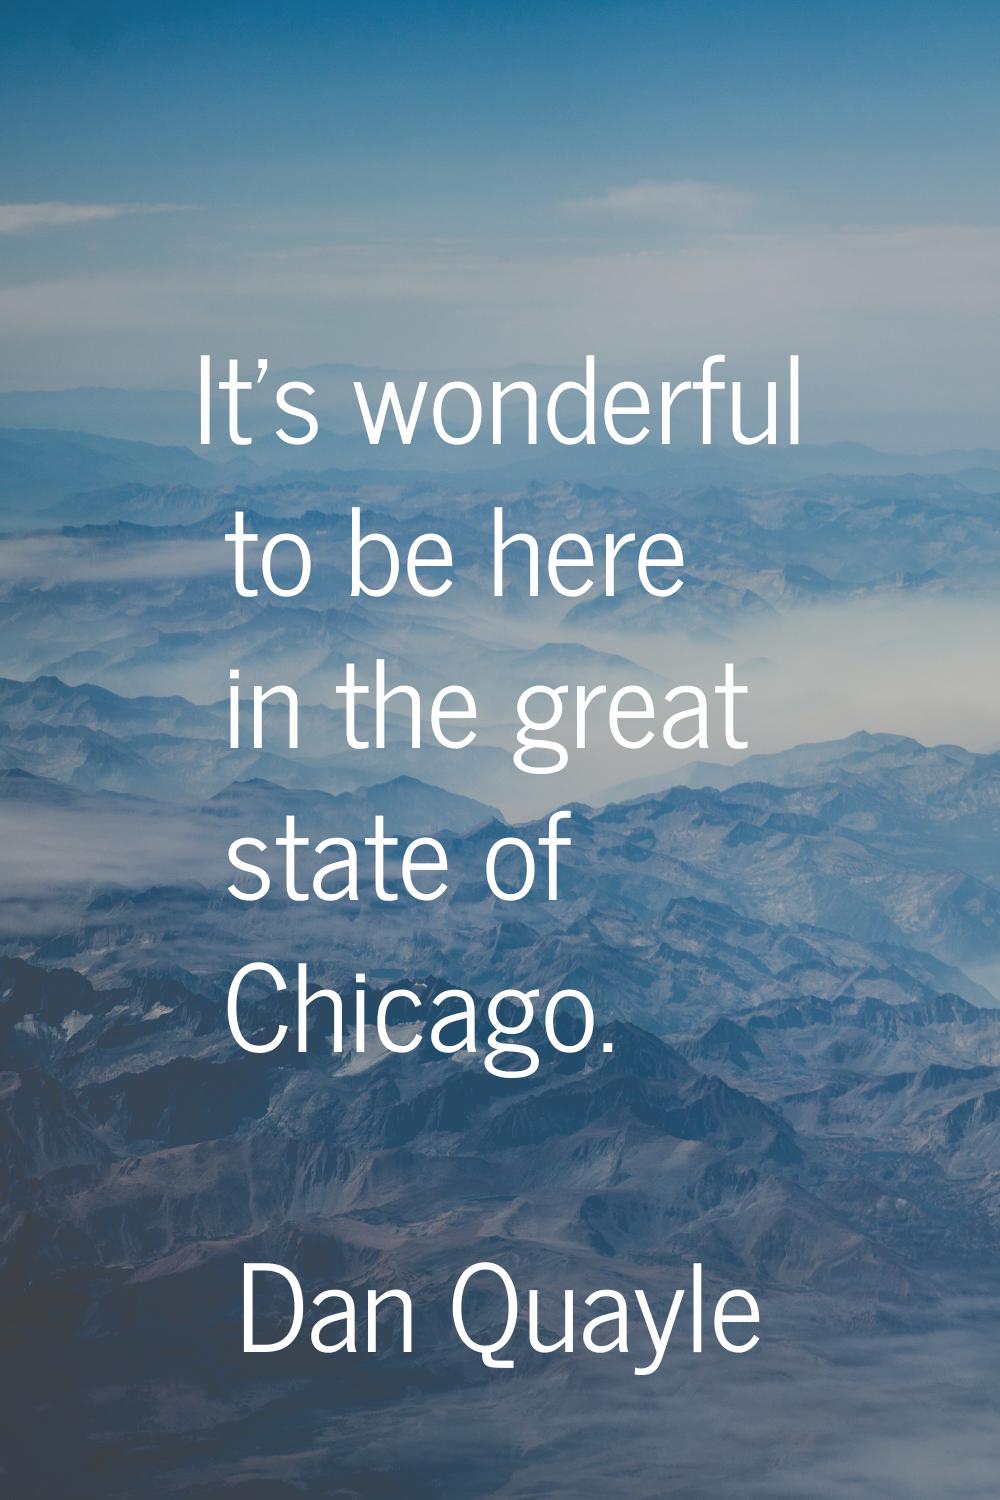 It's wonderful to be here in the great state of Chicago.